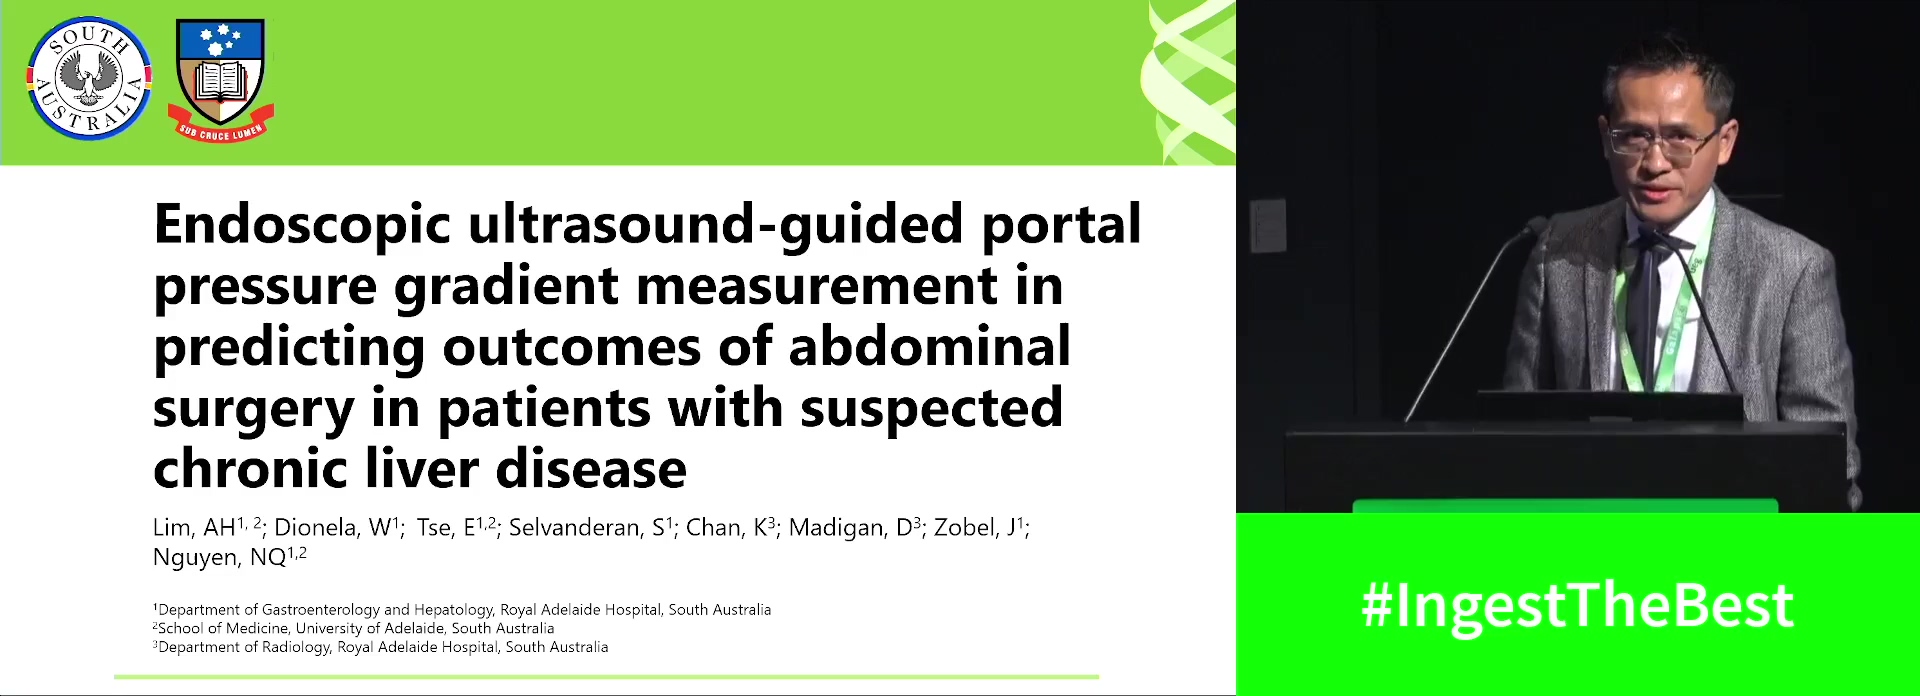 ENDOSCOPIC ULTRASOUND GUIDED PORTAL PRESSURE GRADIENT MEASUREMENT IN PREDICTING OUTCOMES OF ABDOMINAL SURGERY IN PATIENTS WITH CHRONIC LIVER DISEASE